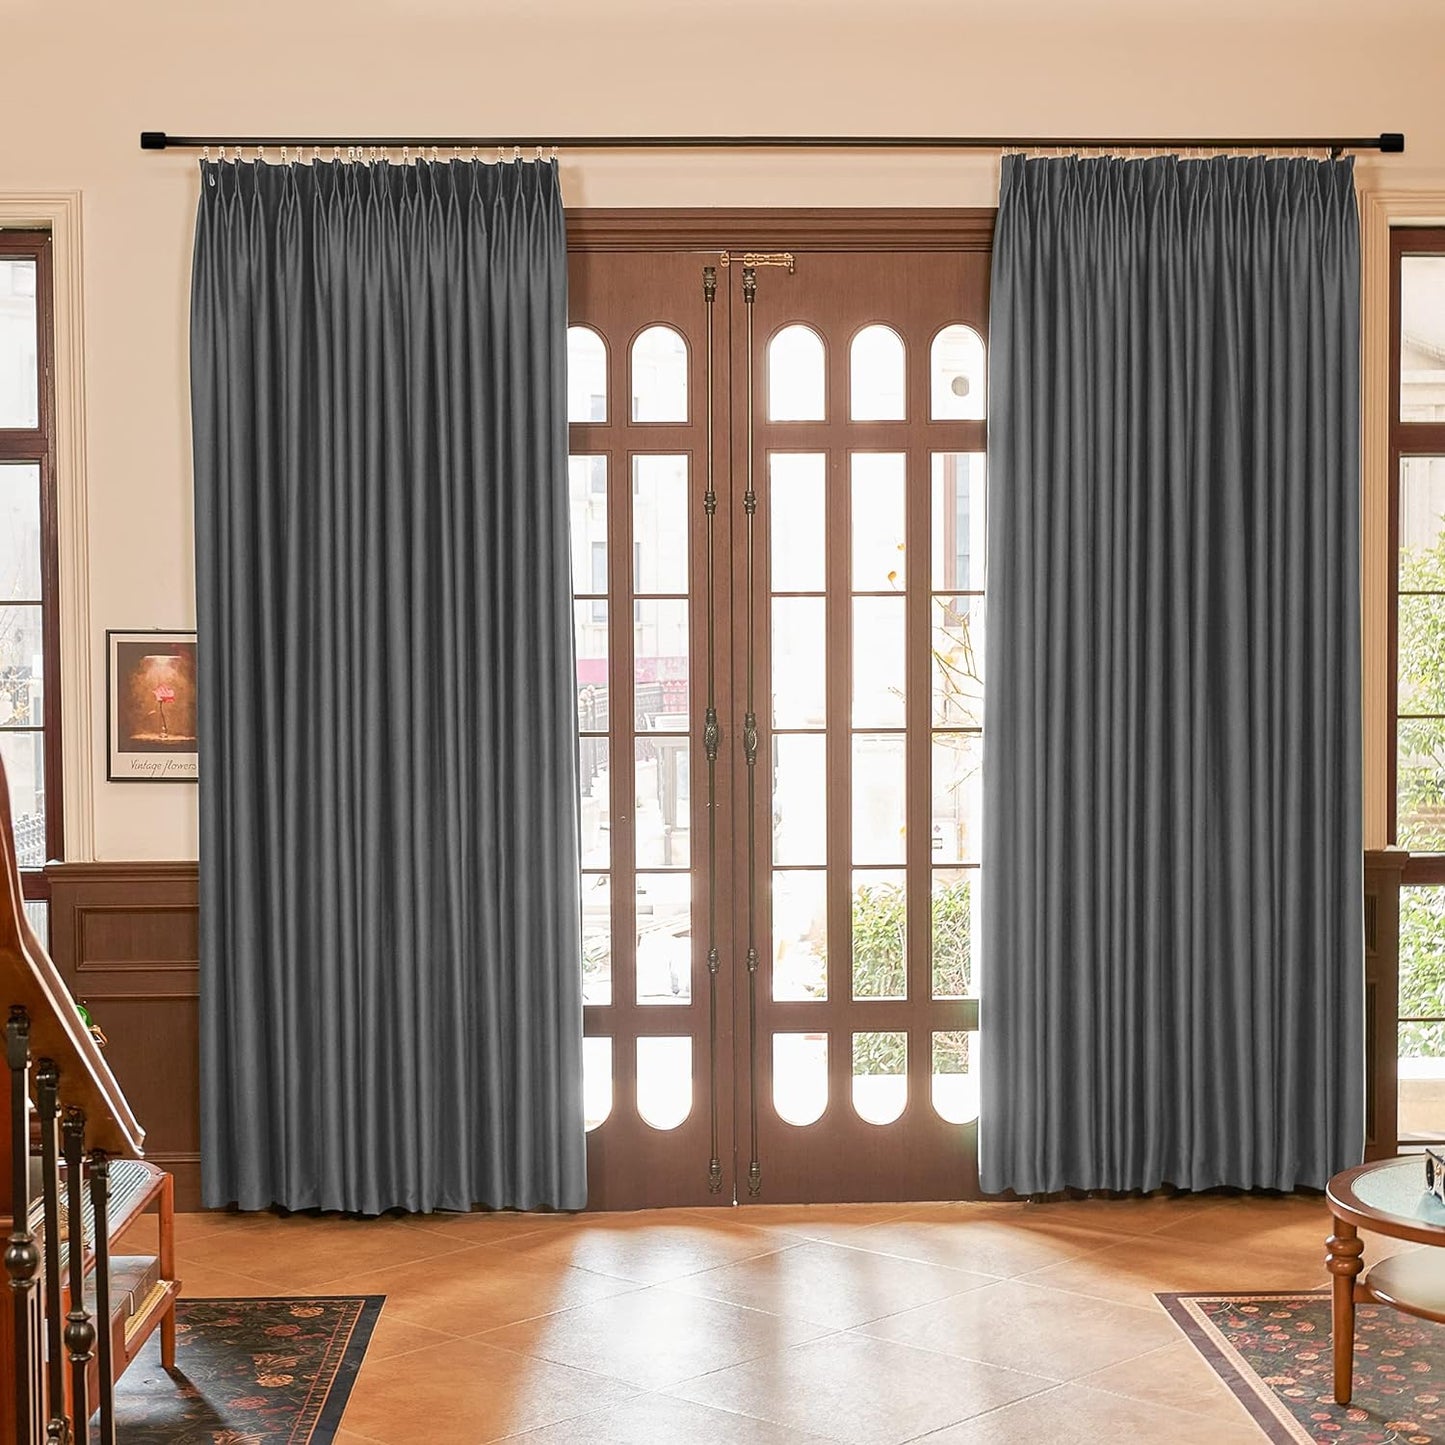 HUTO Beige Pinch Pleated Curtains Thermal Insulated Room Darkening Window Treatment Panel for Living Room, Bedroom, Kitchen, Small Window, 52 by 63 Inches Long, 1 Panel  HUTO Grey 72"W X 96"L 